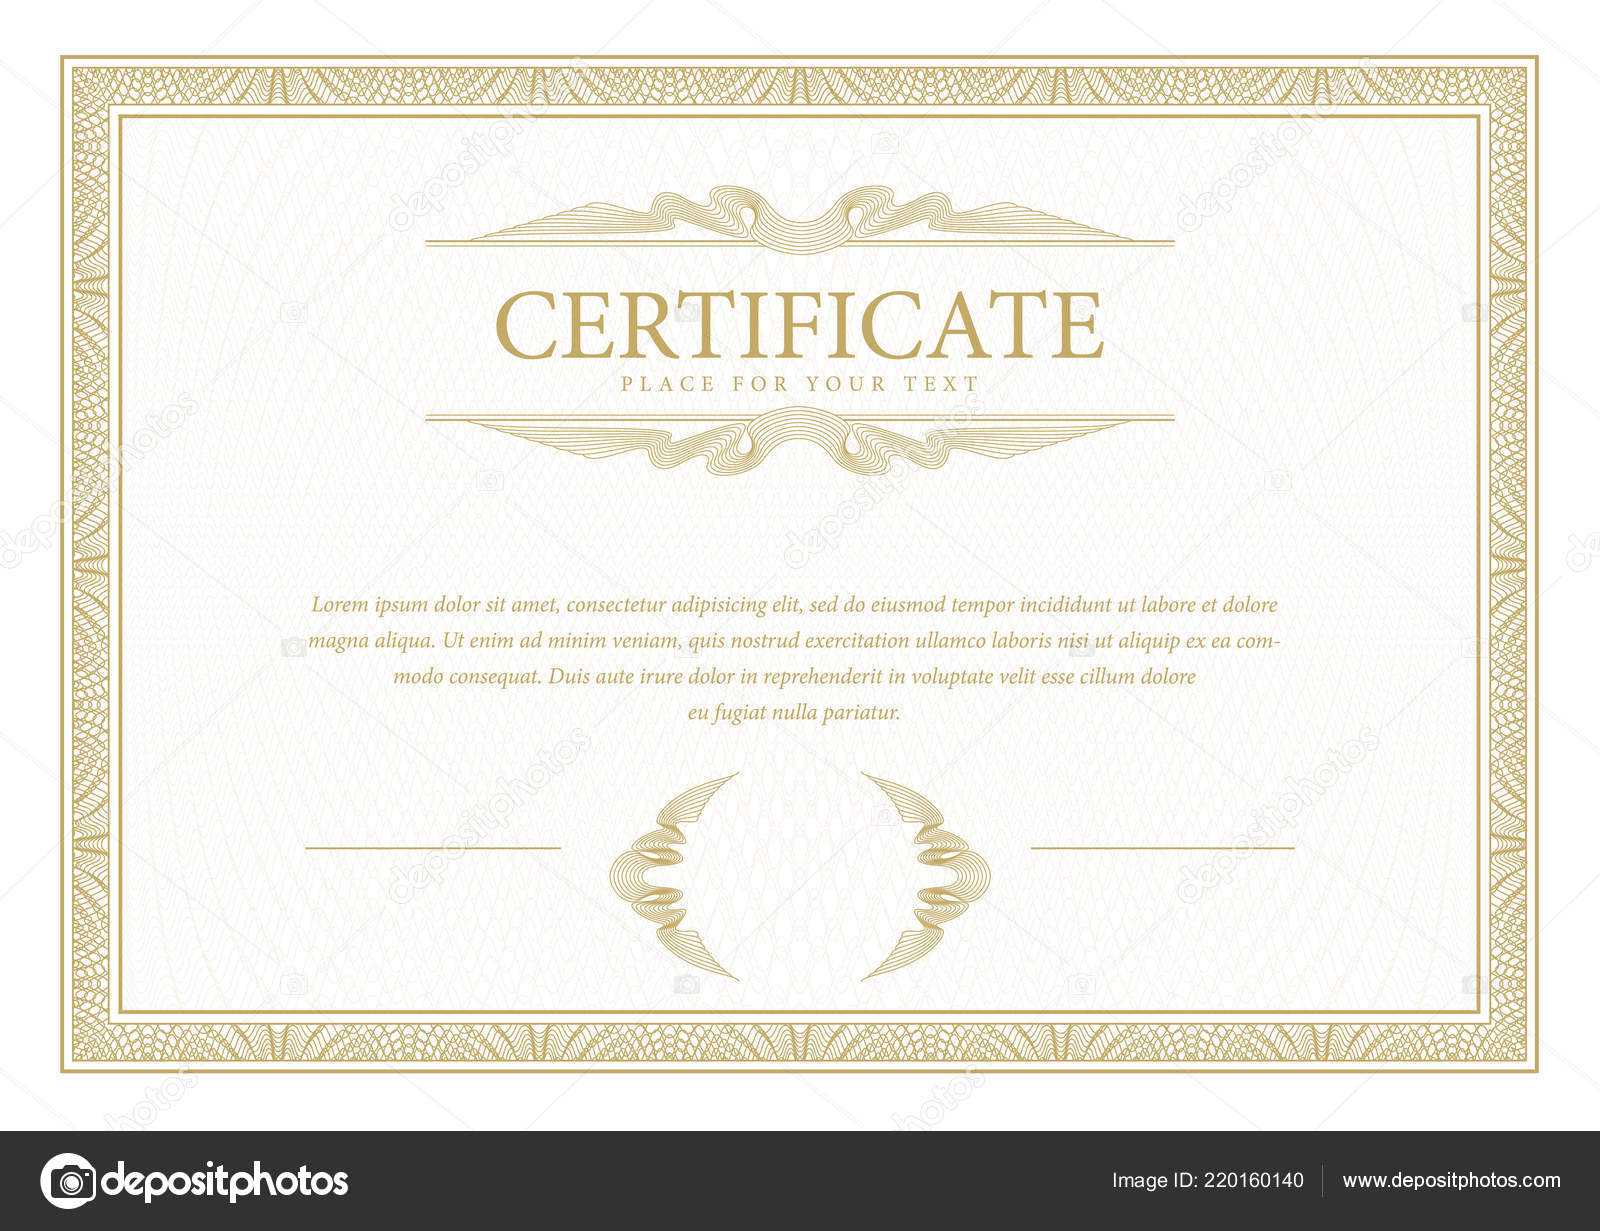 Certificate Template Diploma Currency Border Award Intended For Commemorative Certificate Template